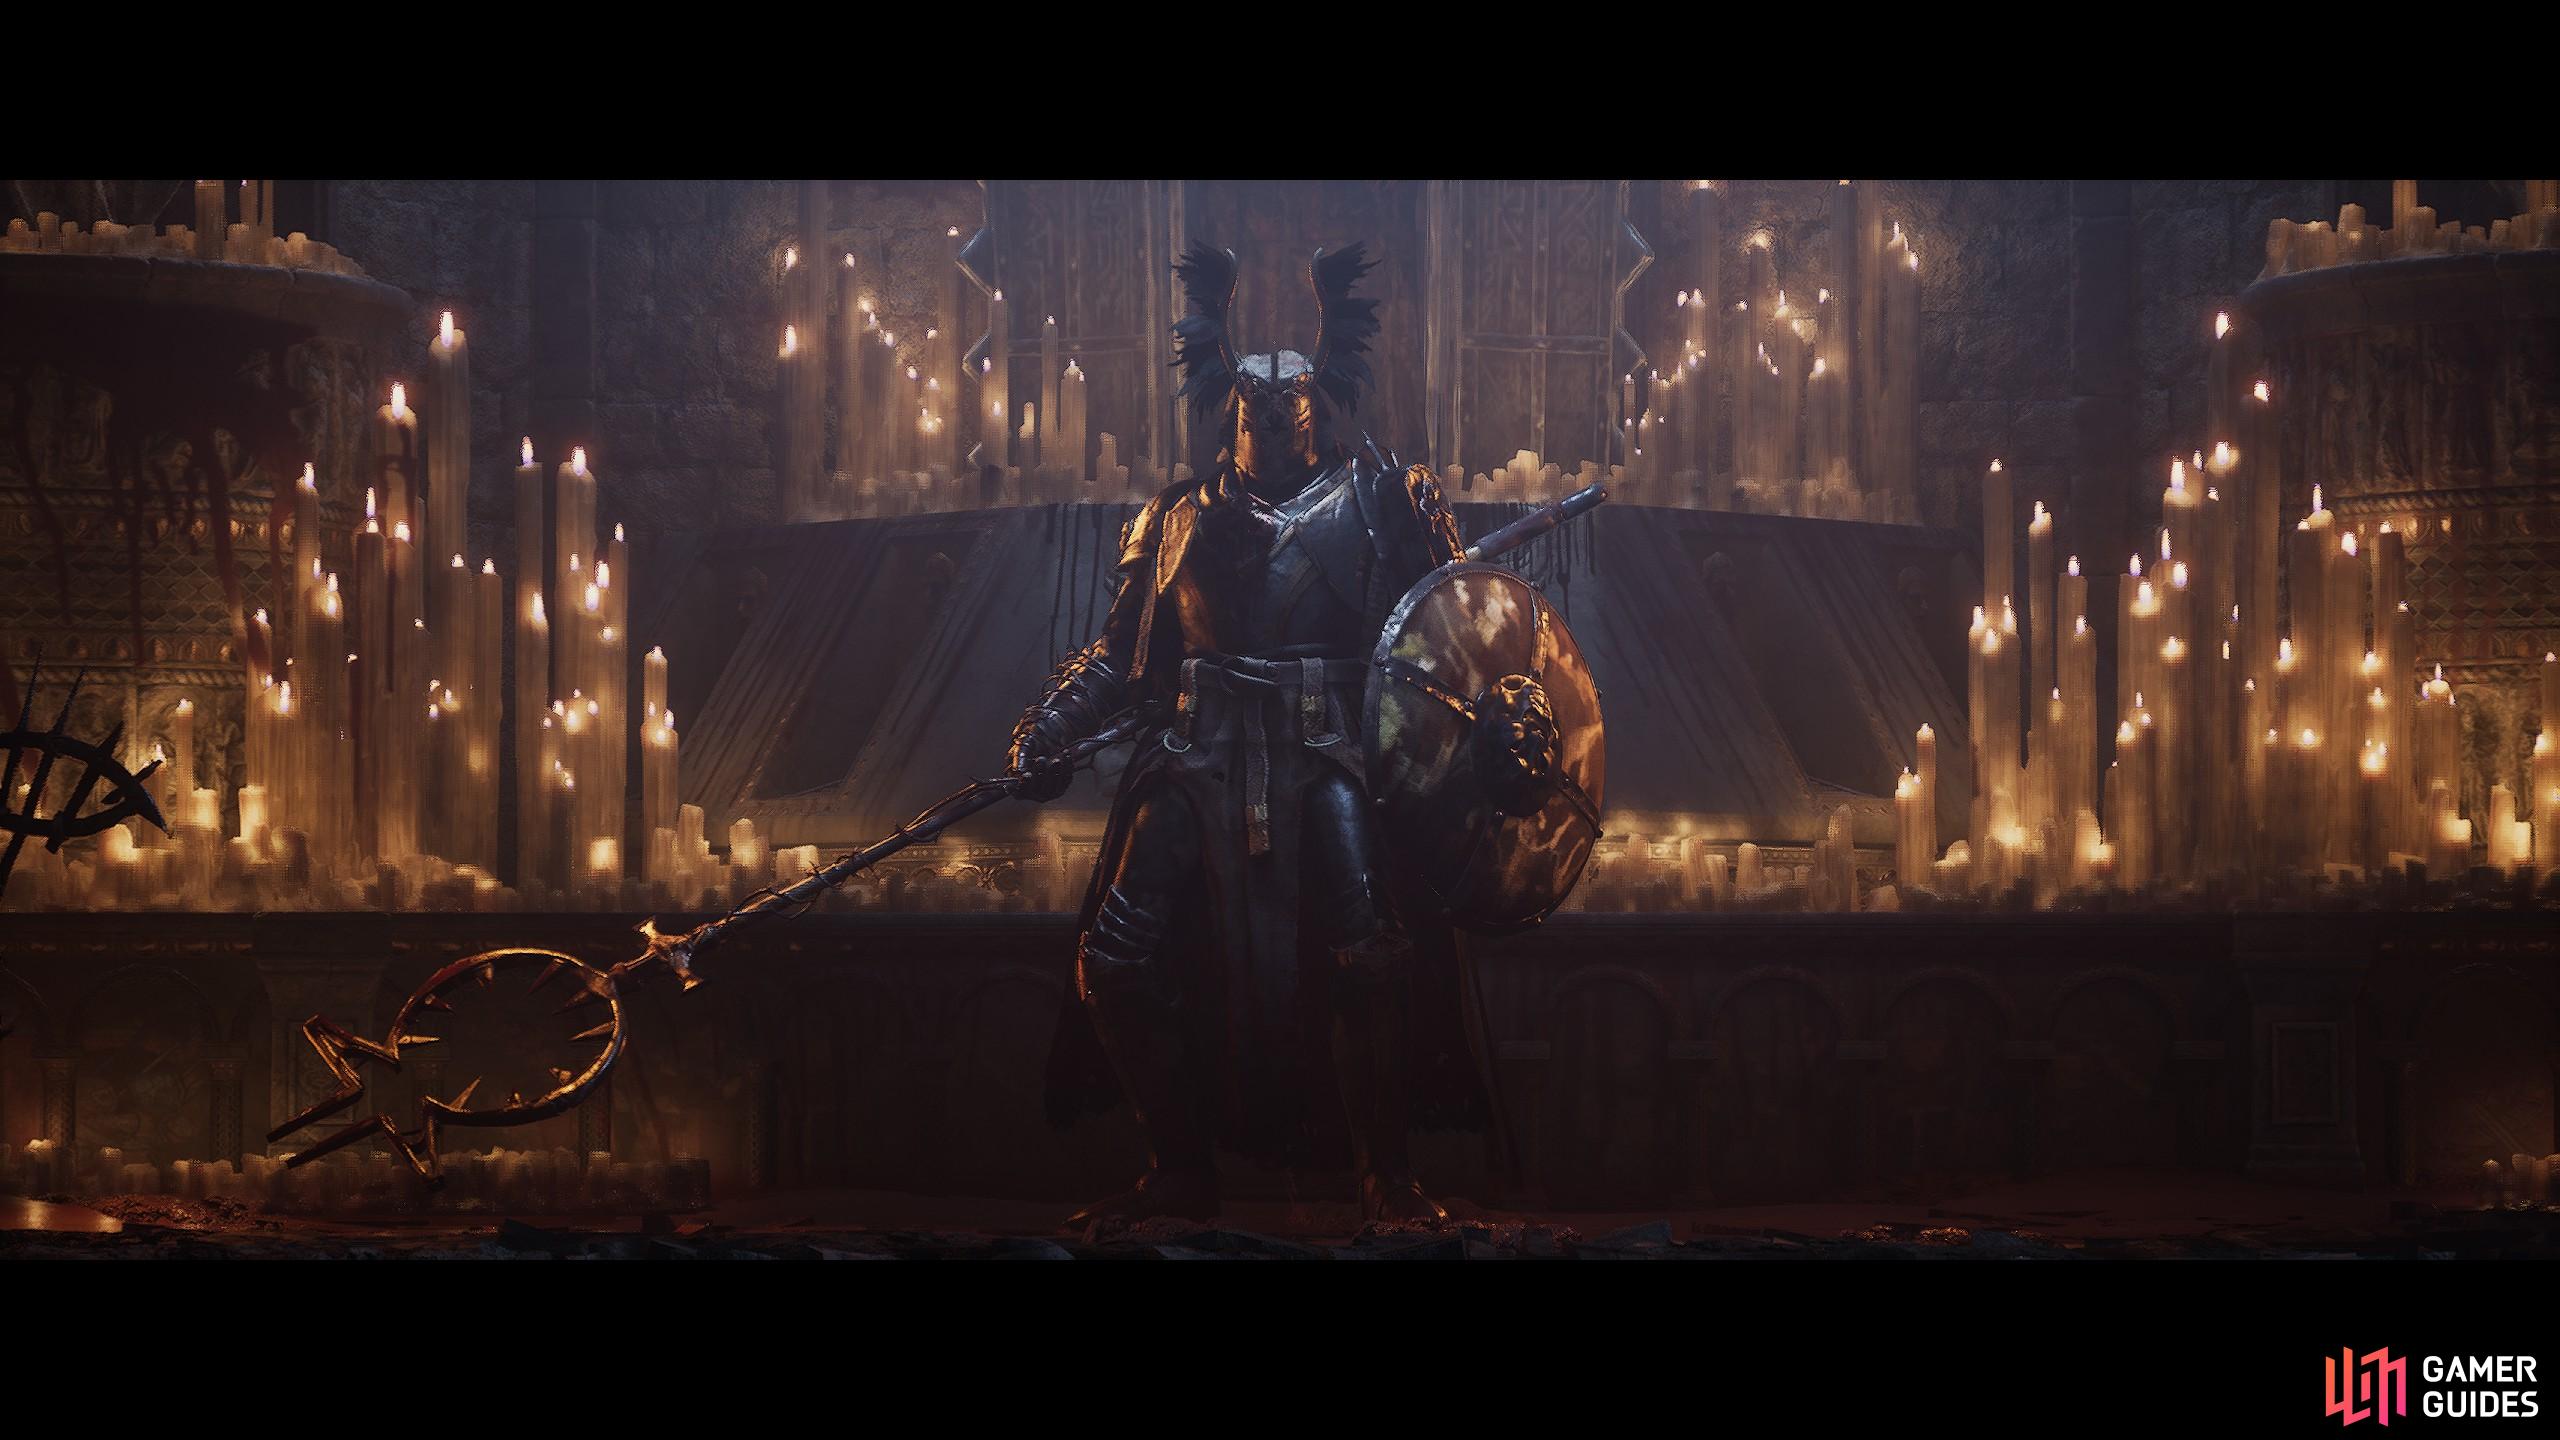 Here are two Hallowed Knight builds in Lords of the Fallen, one offering players the chance to use radiance magic to become a cleric, and another your more classic medieval knight with a two-handed weapon or sword and shield build.